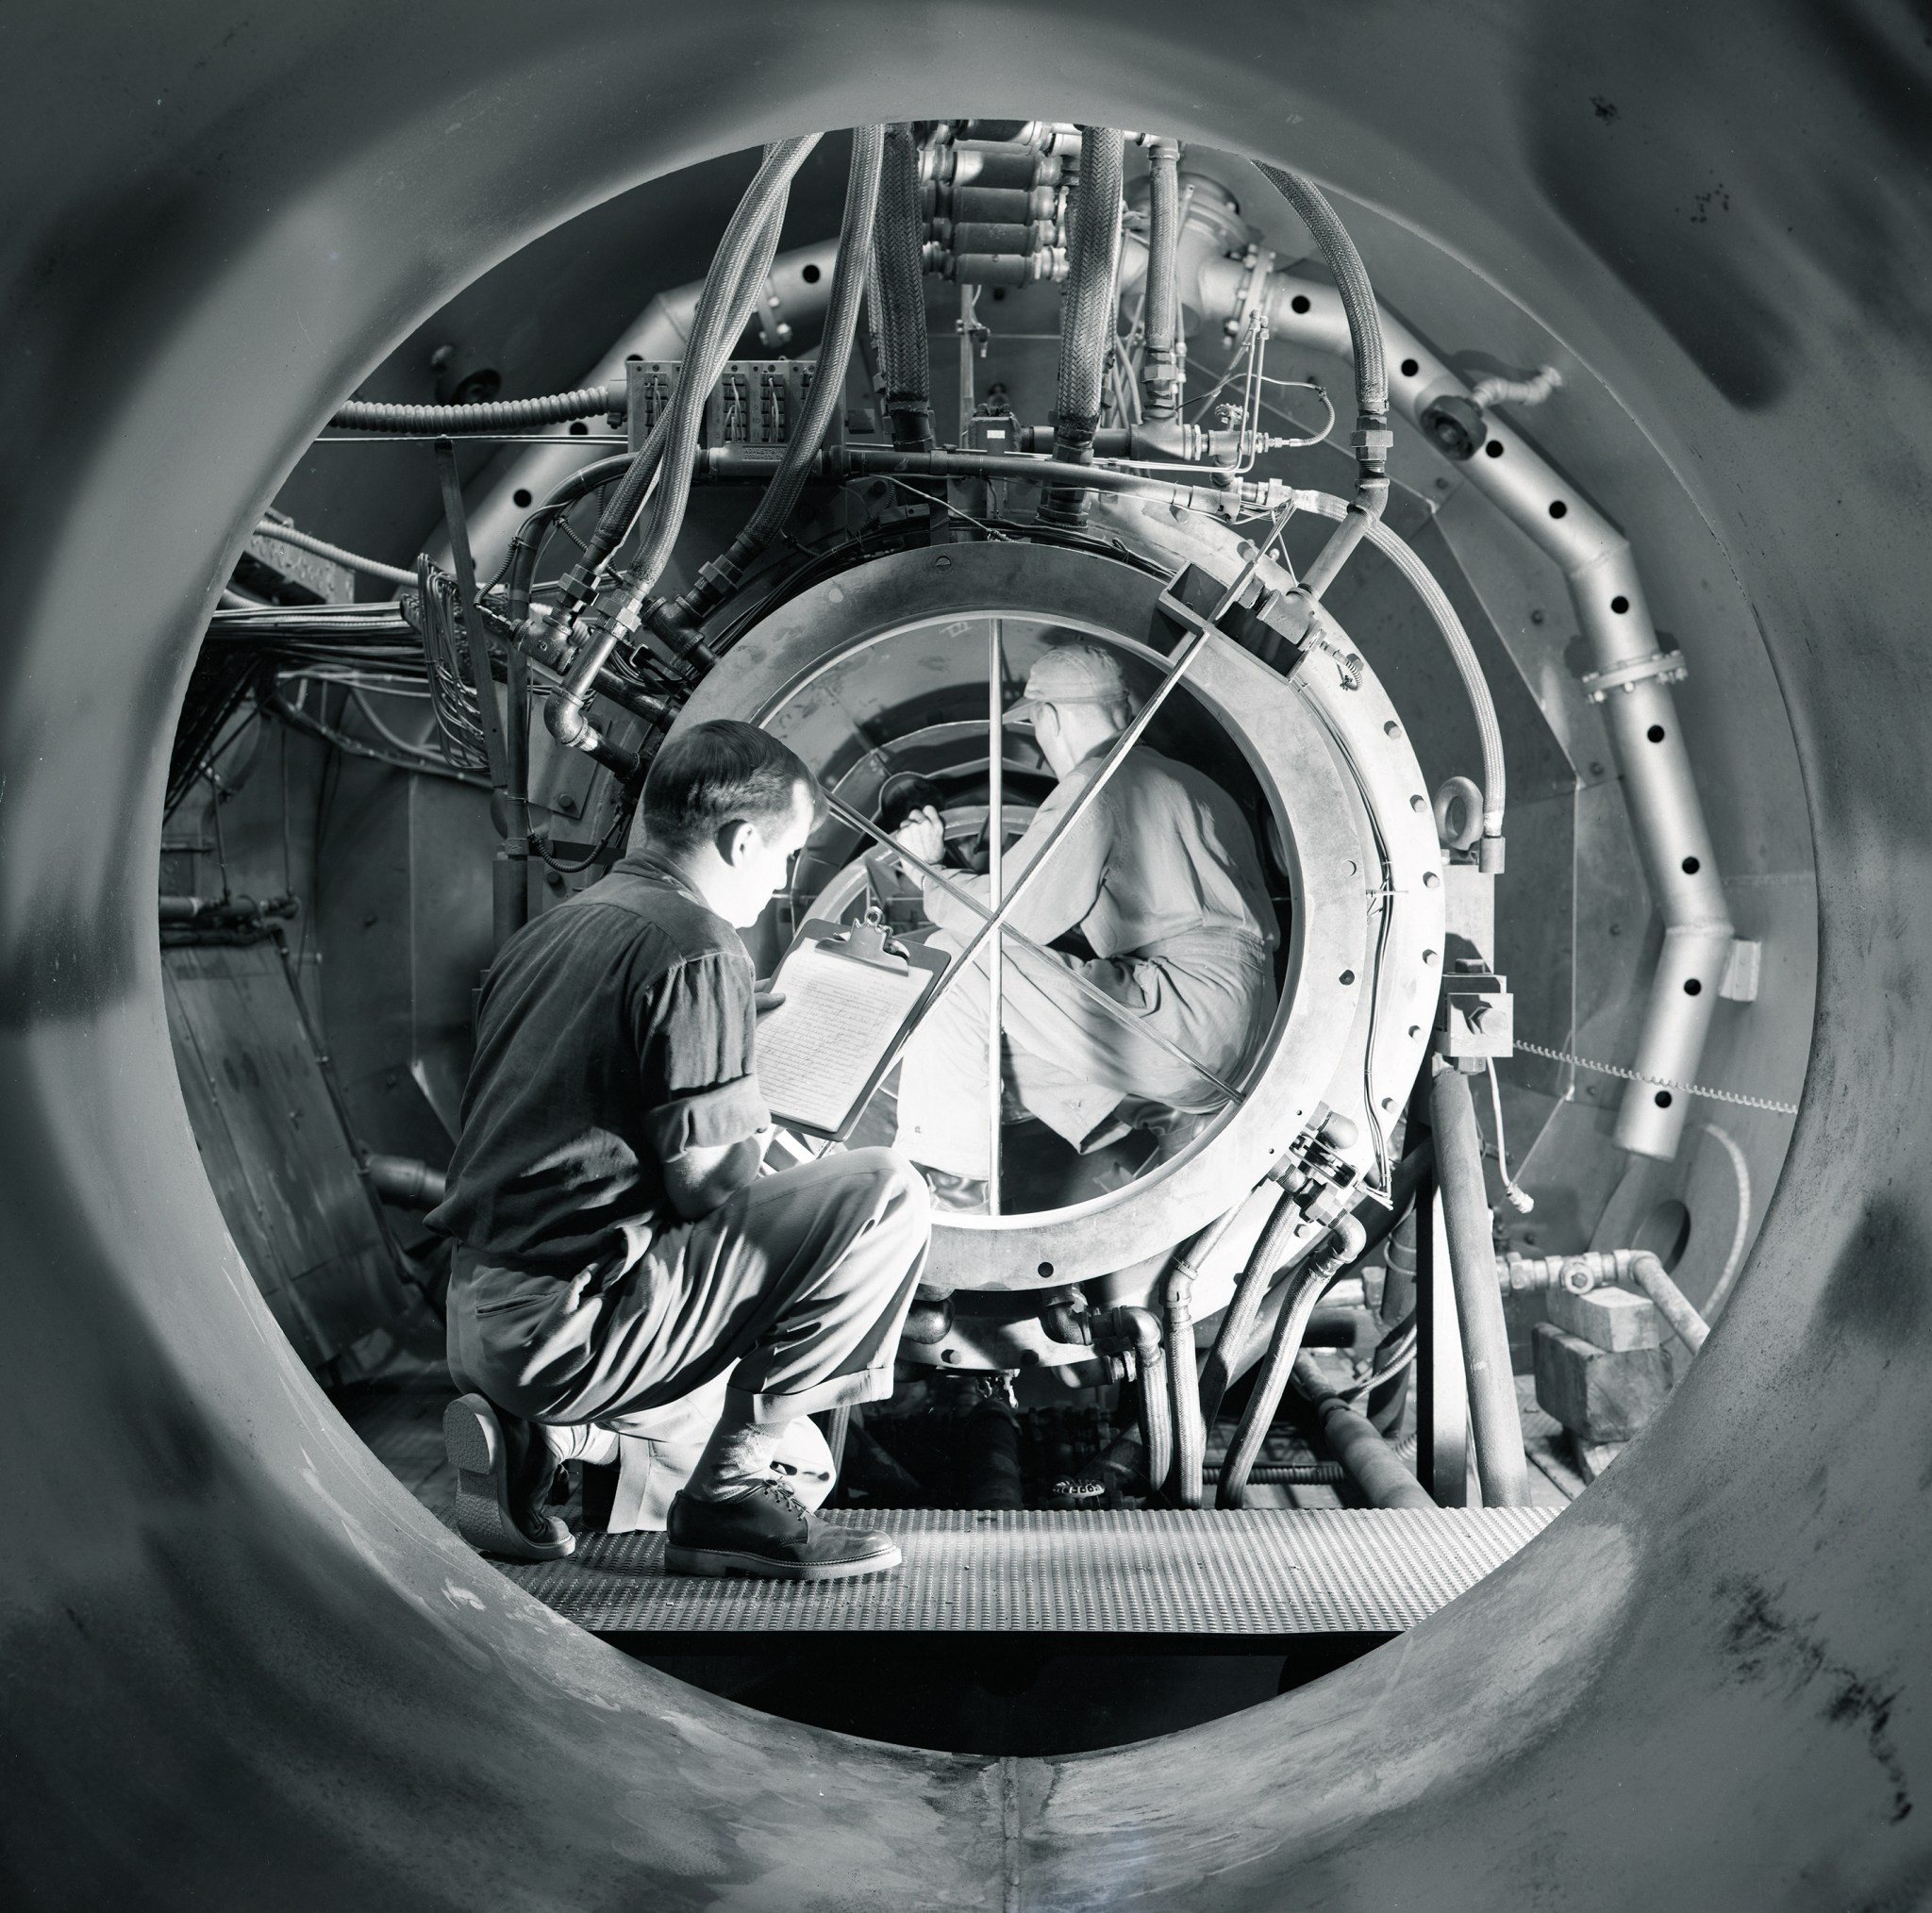 Two engineers crouching with clipboards inside a circular propellant test facility.